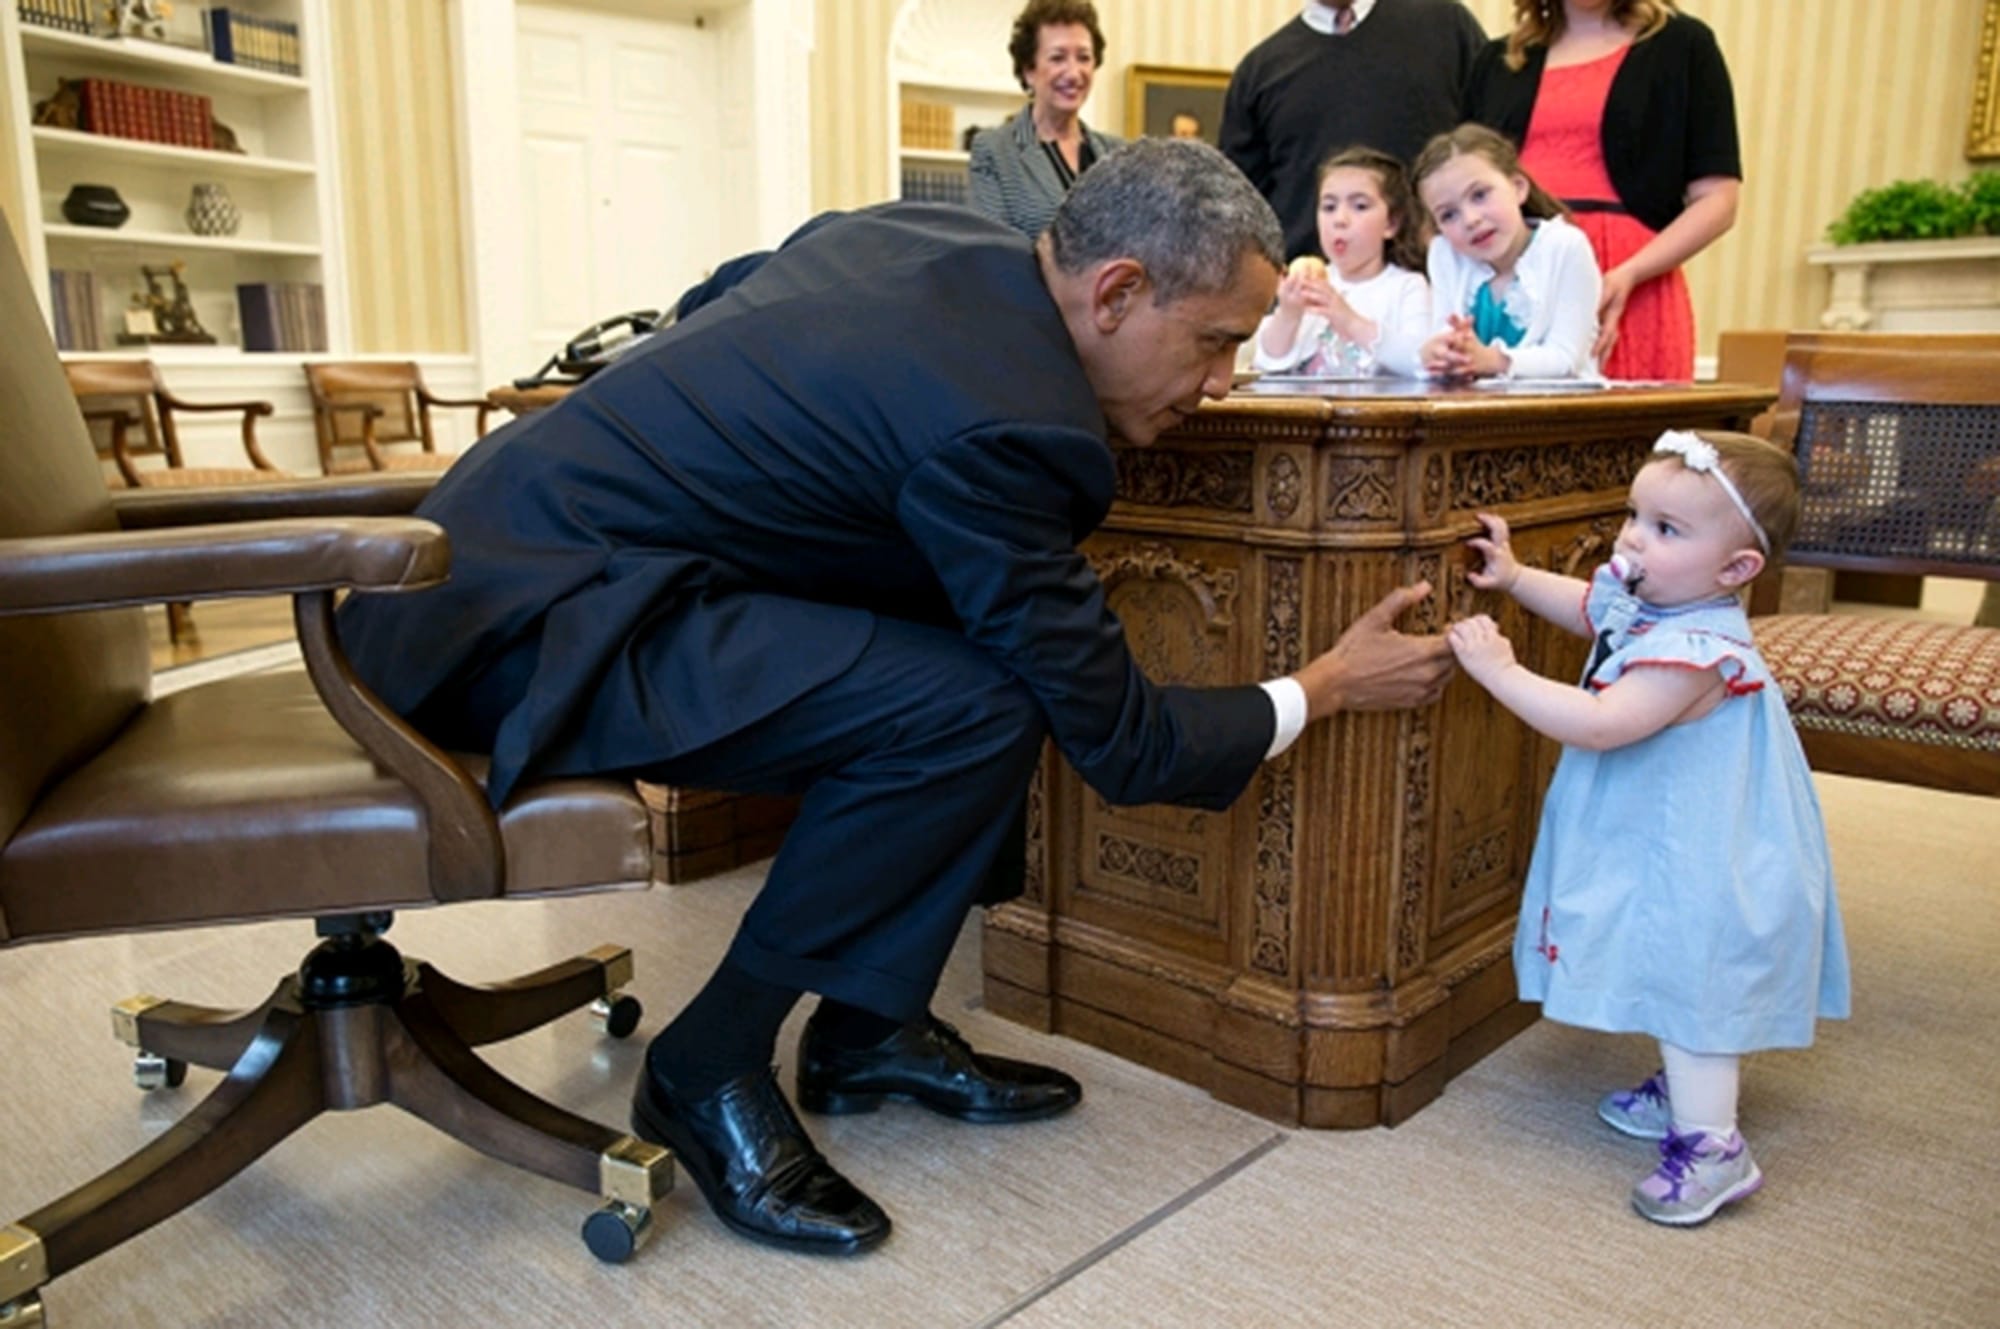 Pete Souza/Official White House photo
President Barack Obama holds the hand of Lincoln Rose Pierce Smith, the daughter of Jamie Smith, former deputy press secretary, in the Oval Office. Watching are her cousins Sage and Elsa Smith, daughters of David Smith and Bethany Rivera, a teacher Fort Vancouver High School.